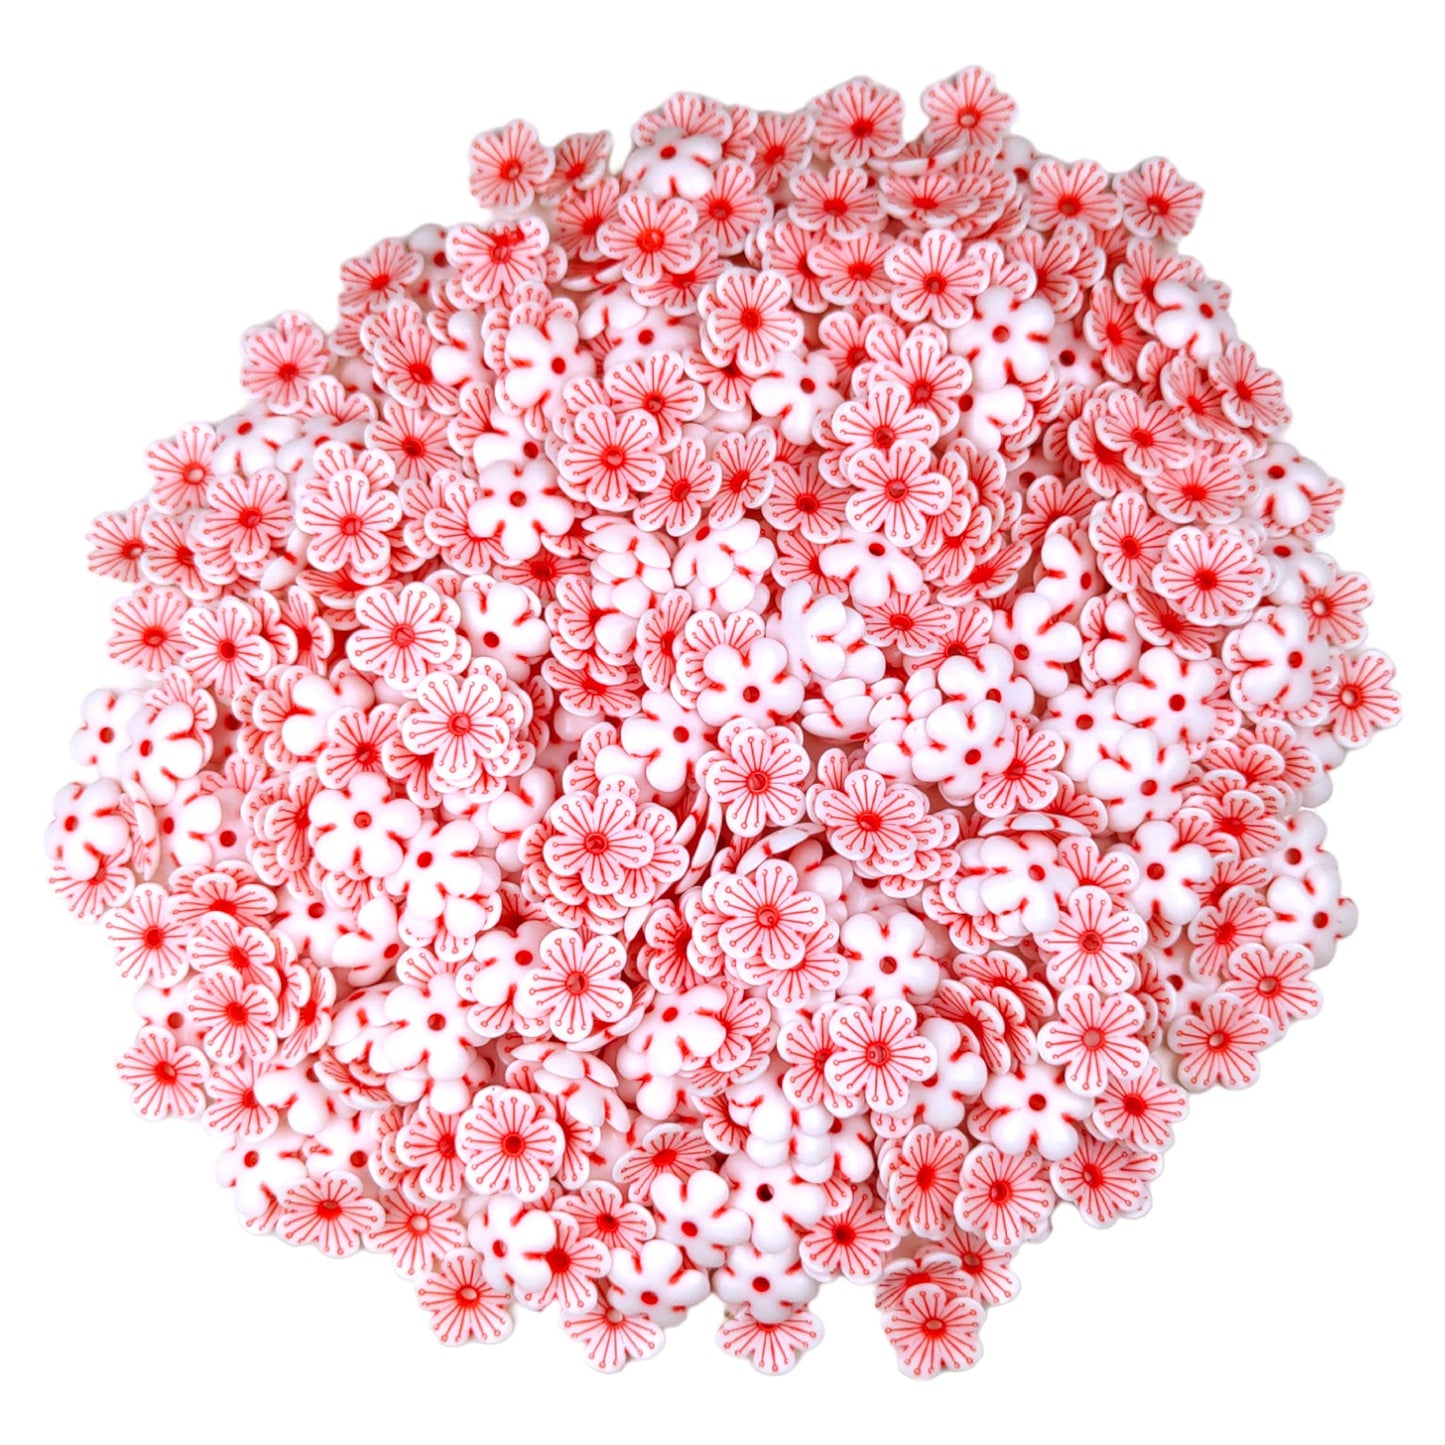 Indian Petals 12mm Small Acrylic Pastel Color Flower For Craft Or Decoration, Red